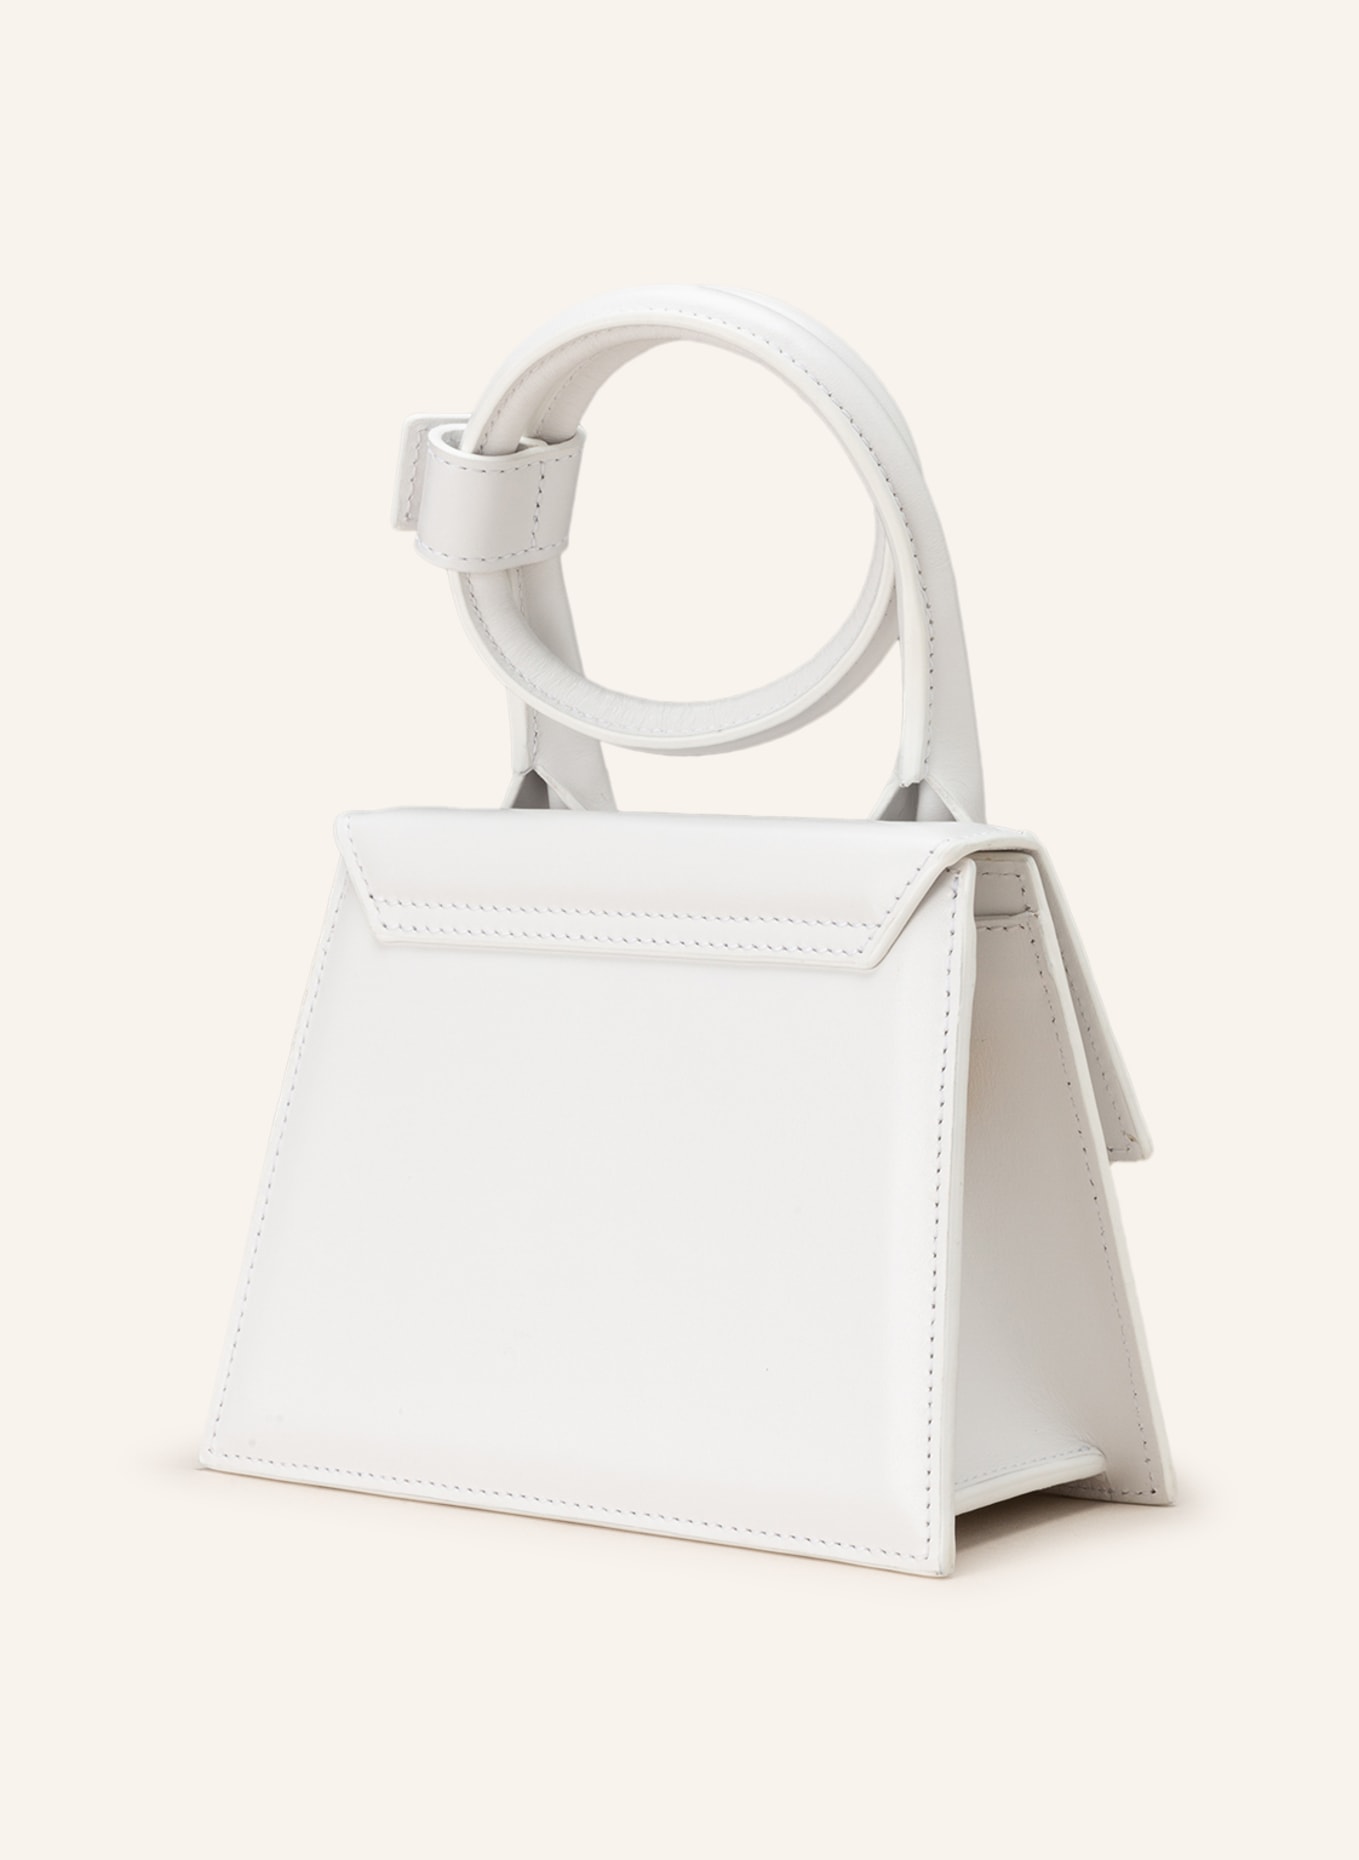 JACQUEMUS Handtasche LE CHIQUITO NOEUD, Farbe: WEISS (Bild 2)